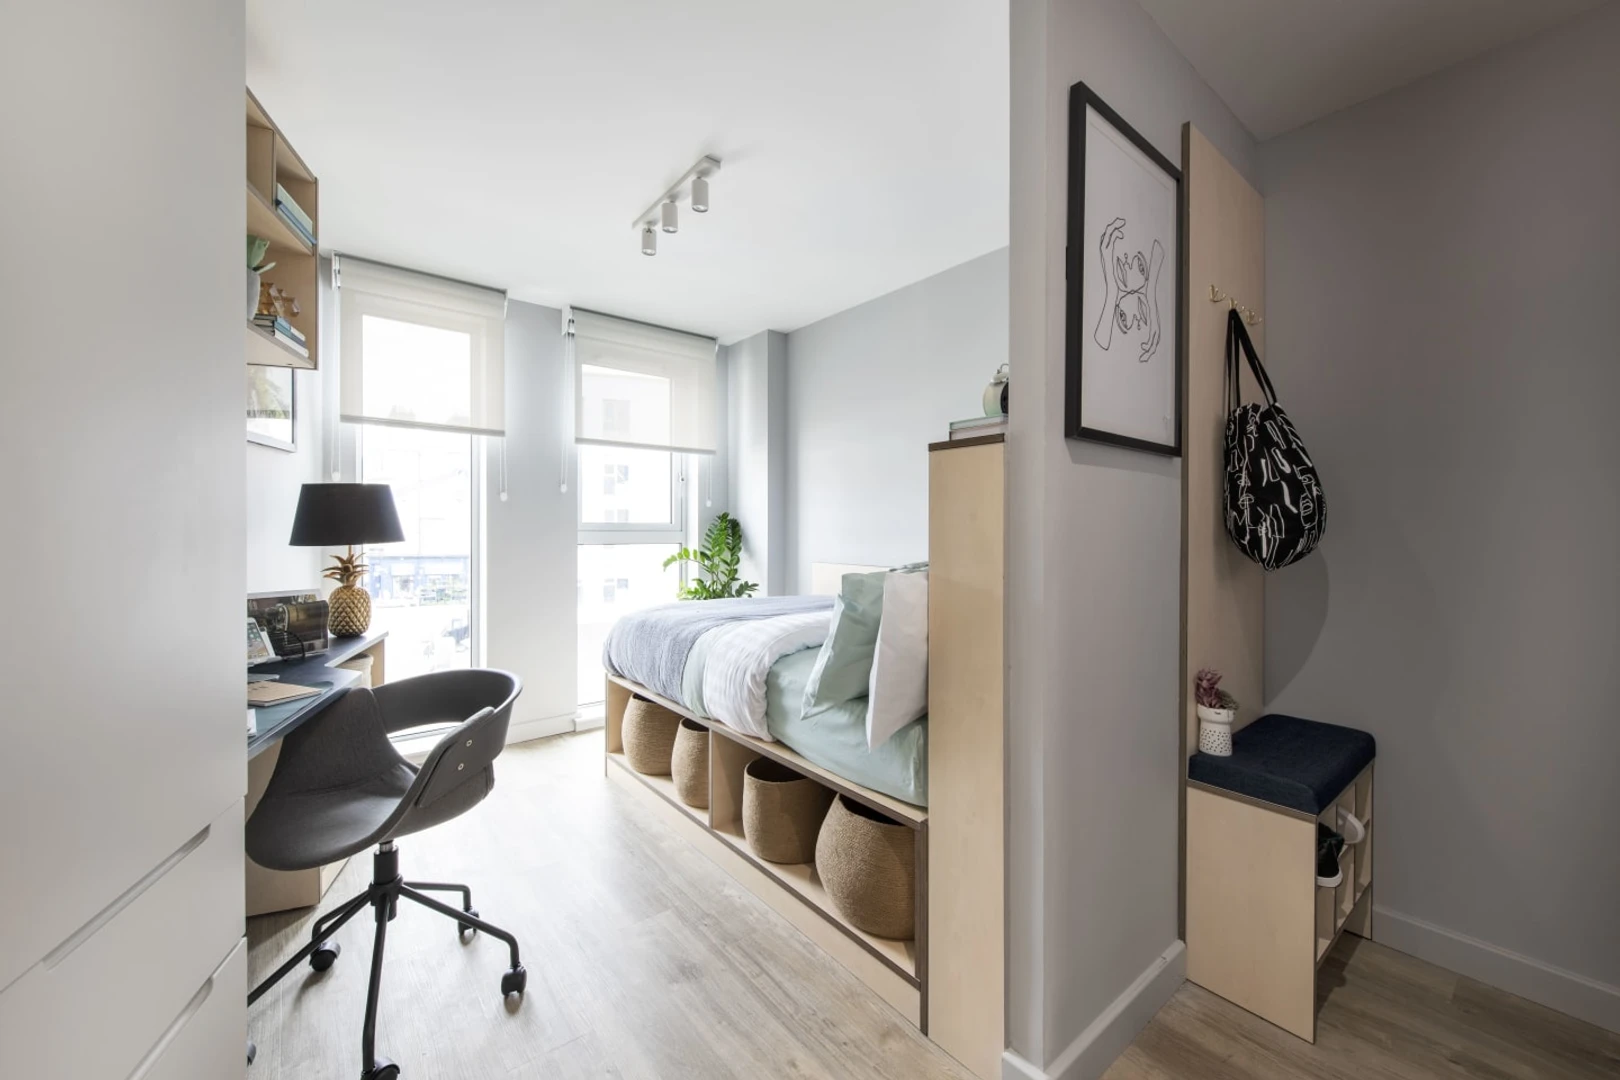 Renting rooms by the month in Edinburgh